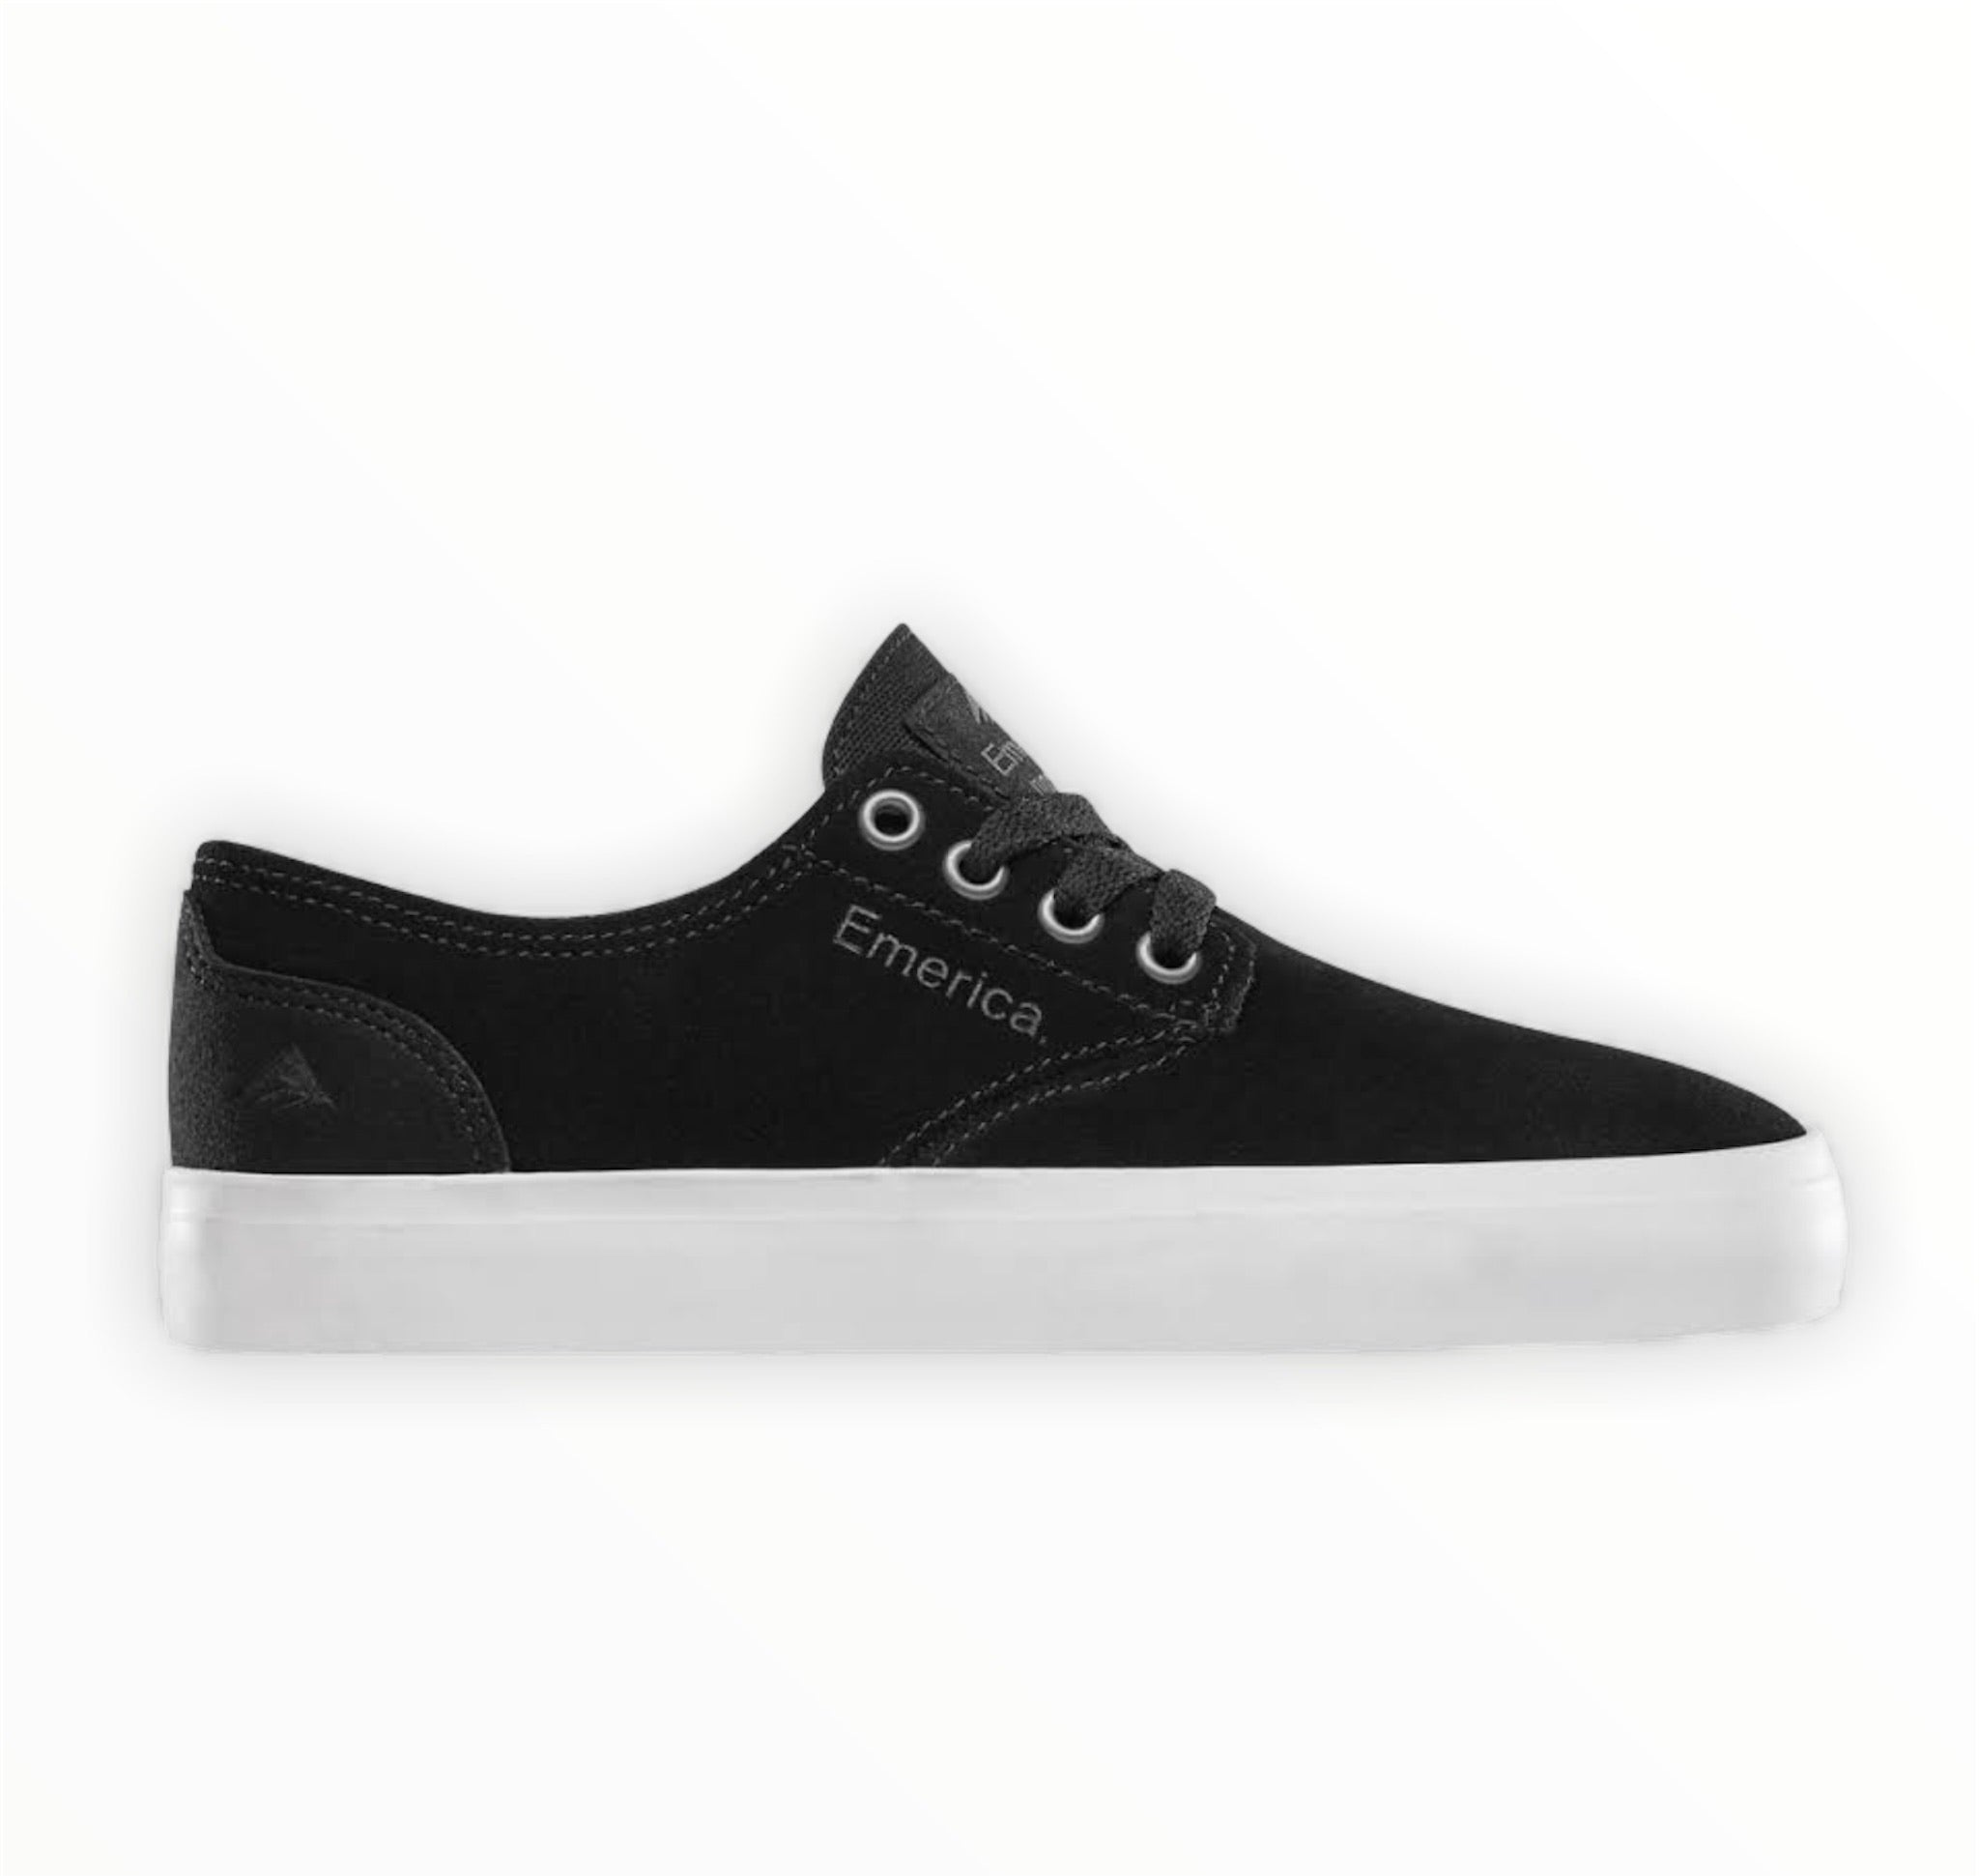 The Romero Laced YOUTH Black/White/Gum